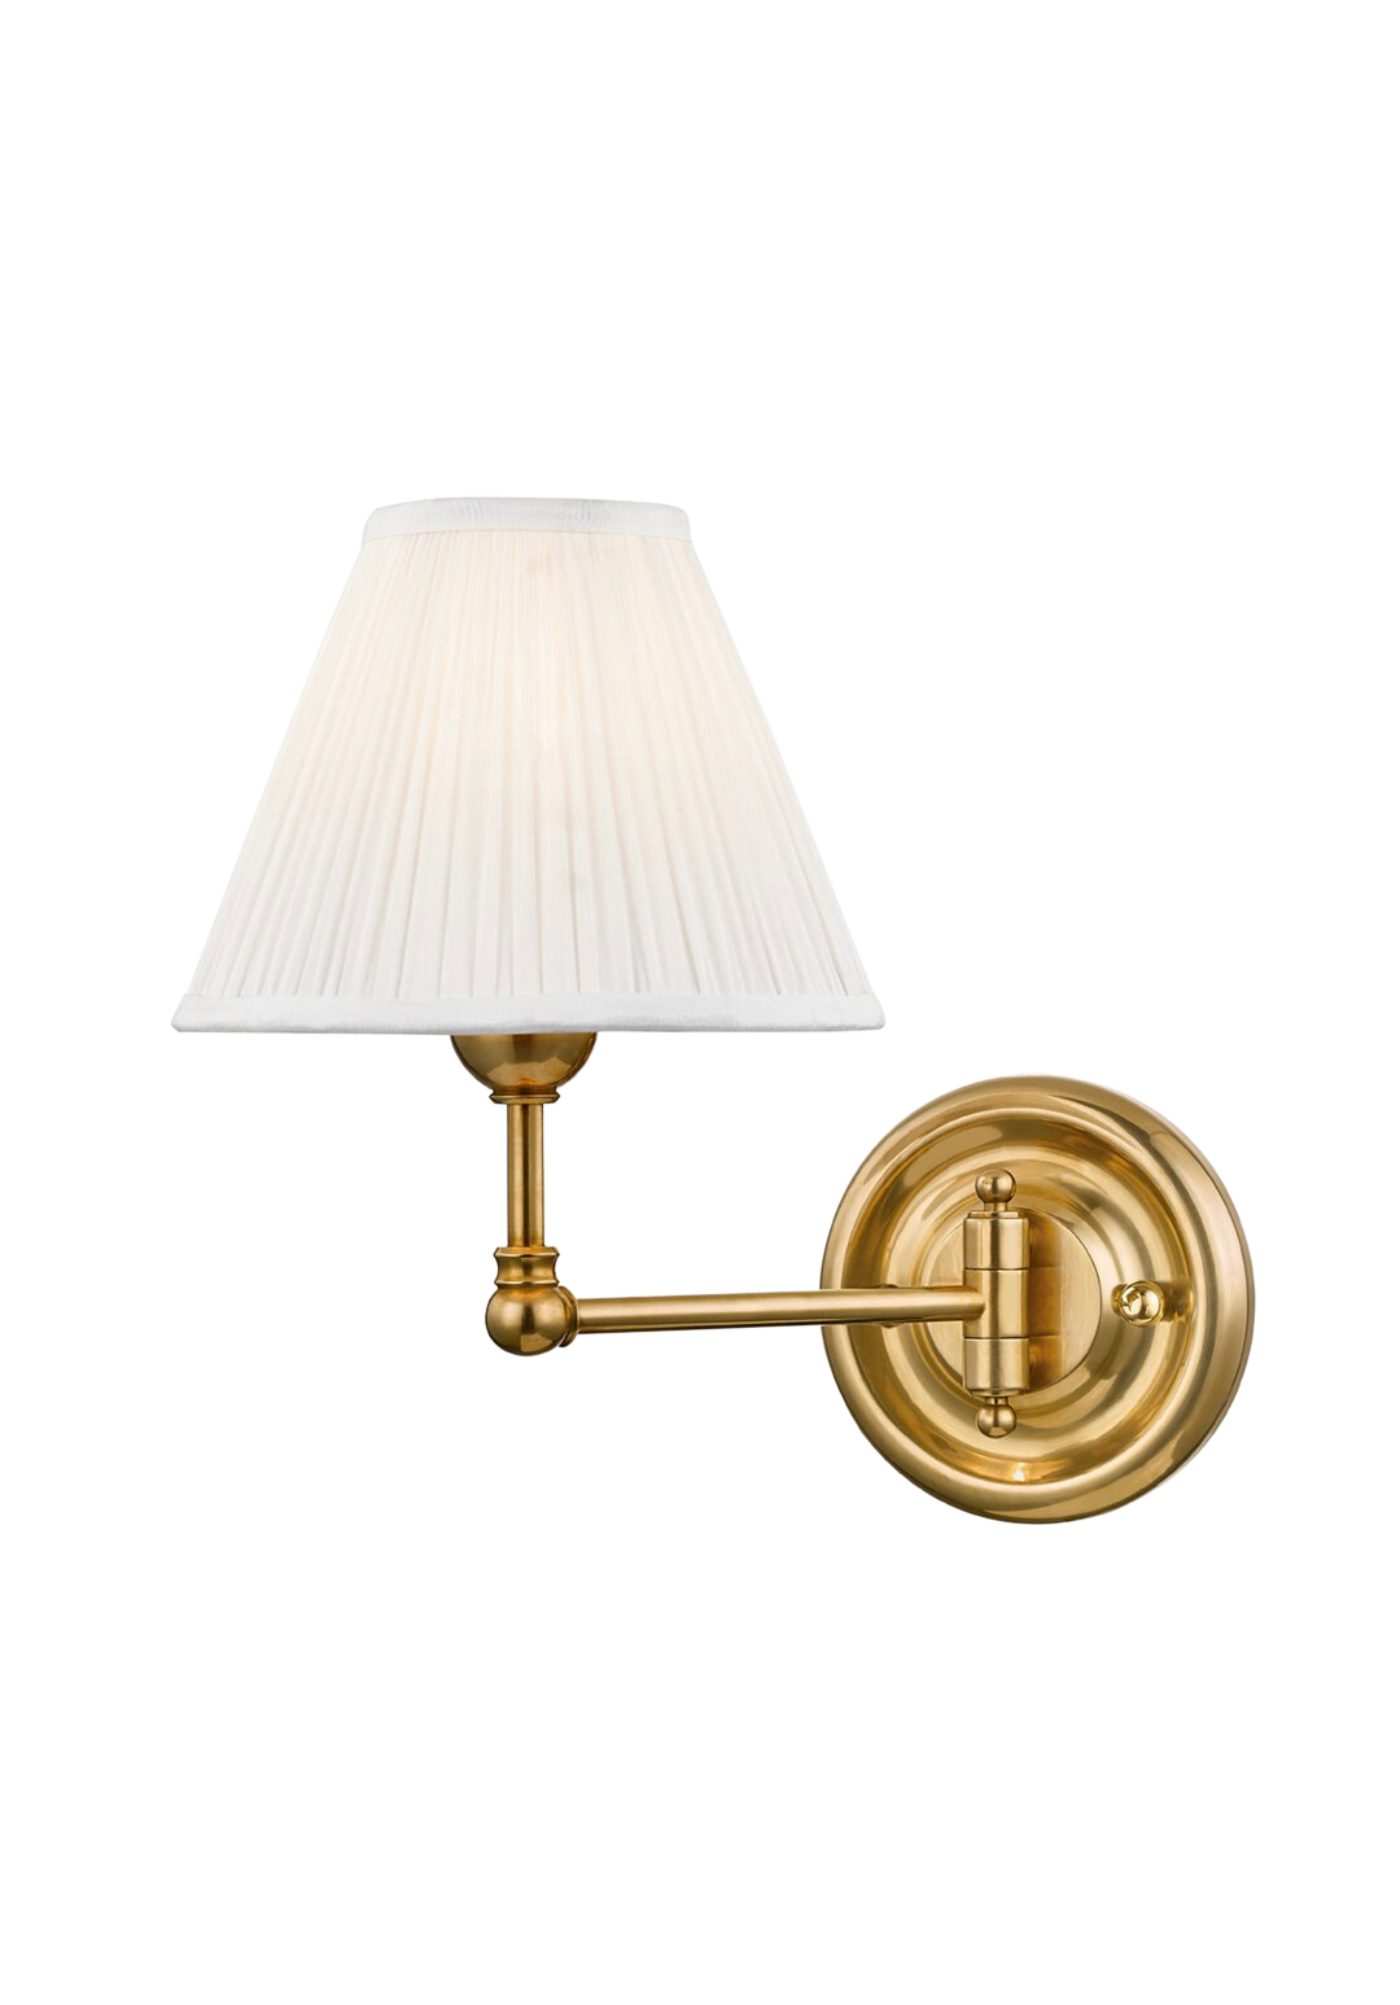 Strang Swing Arm Sconce By Mark D. Sikes